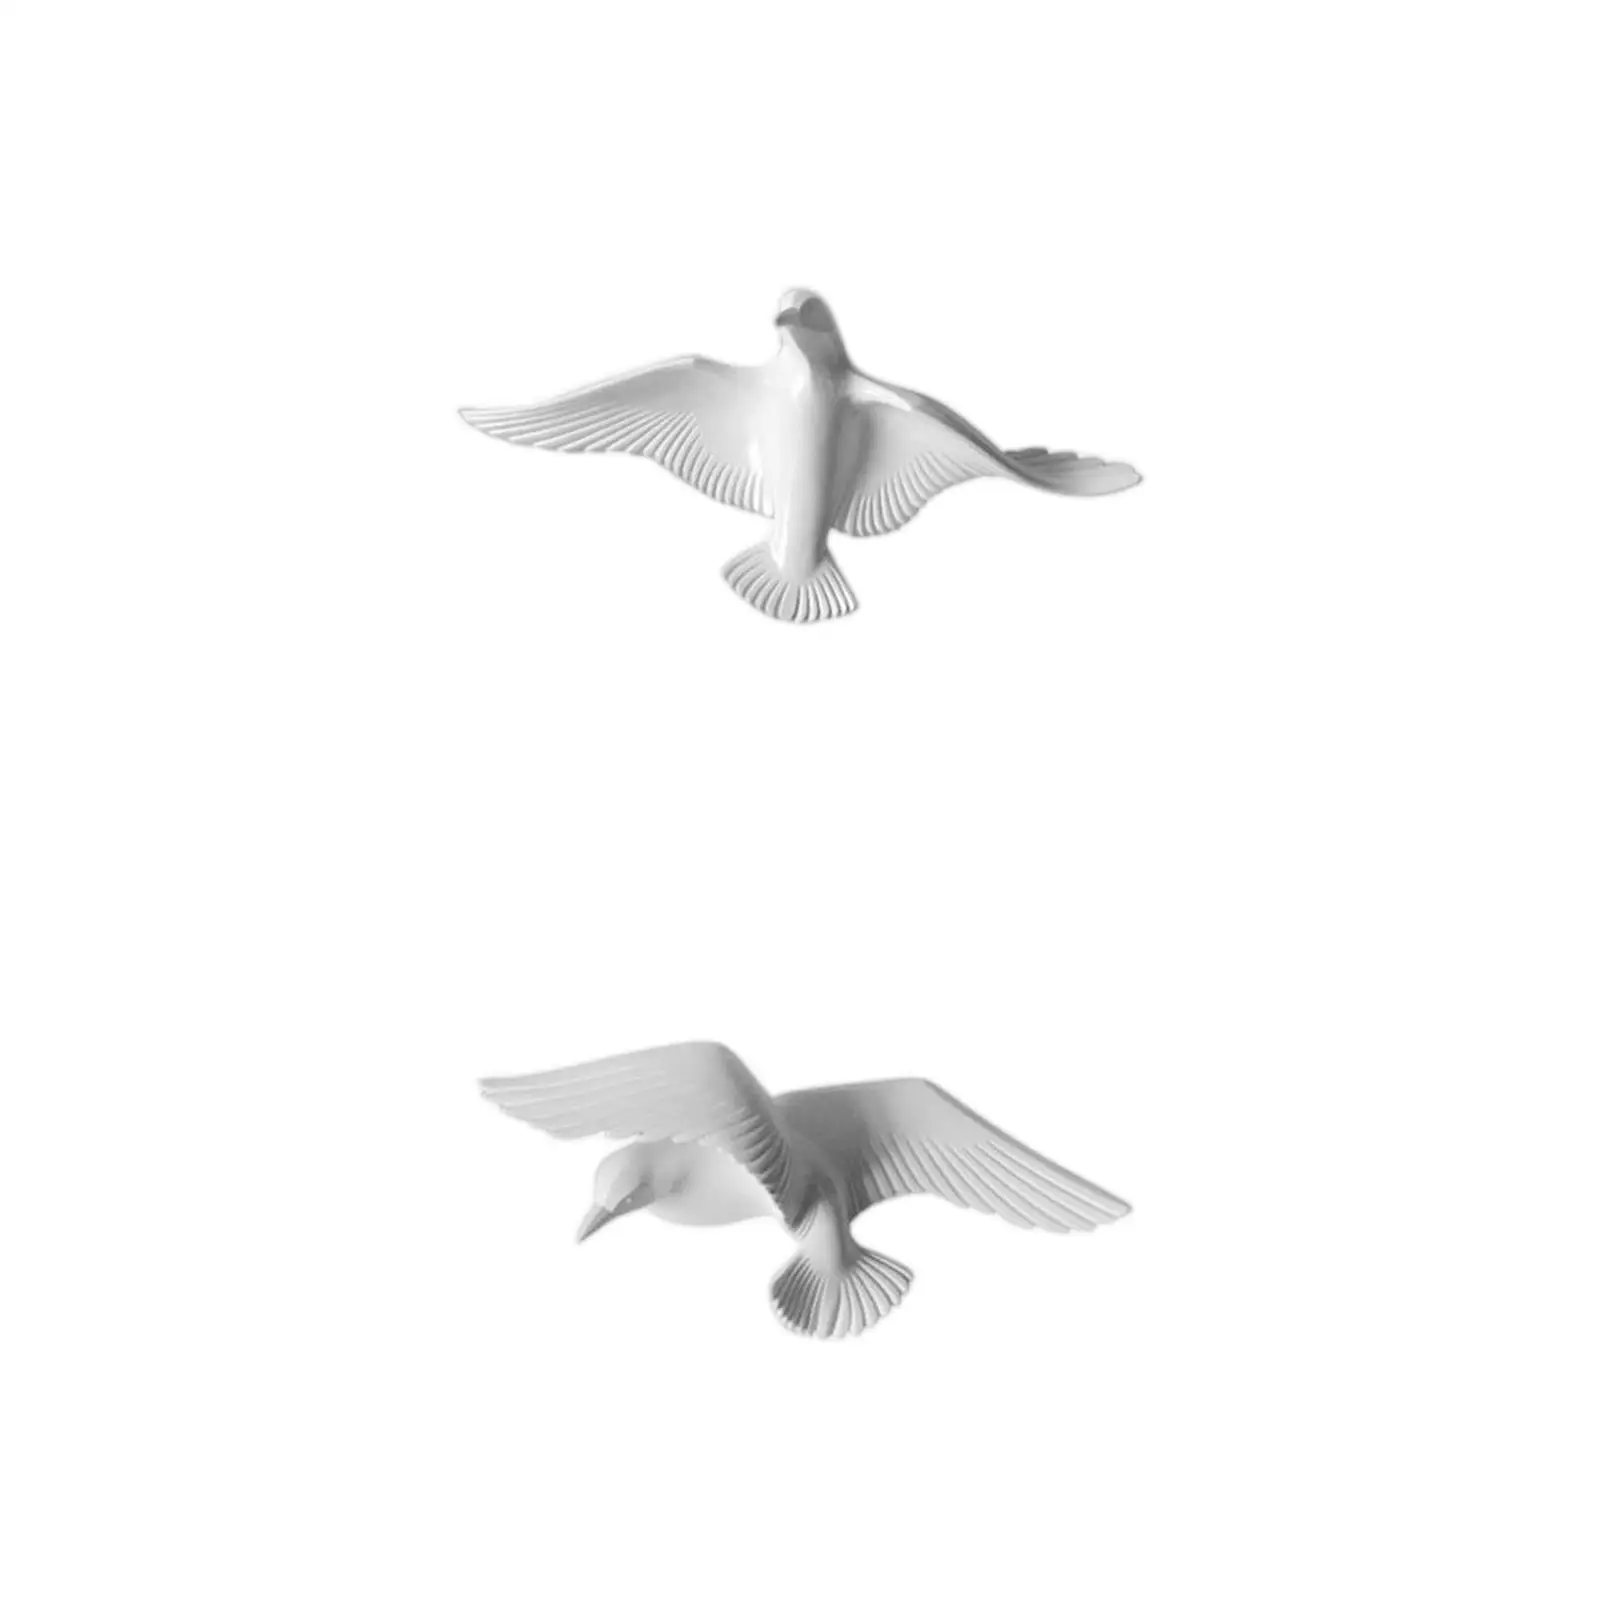 2Pcs Fashion Resin Seagull Living Room Office Wall Decorations